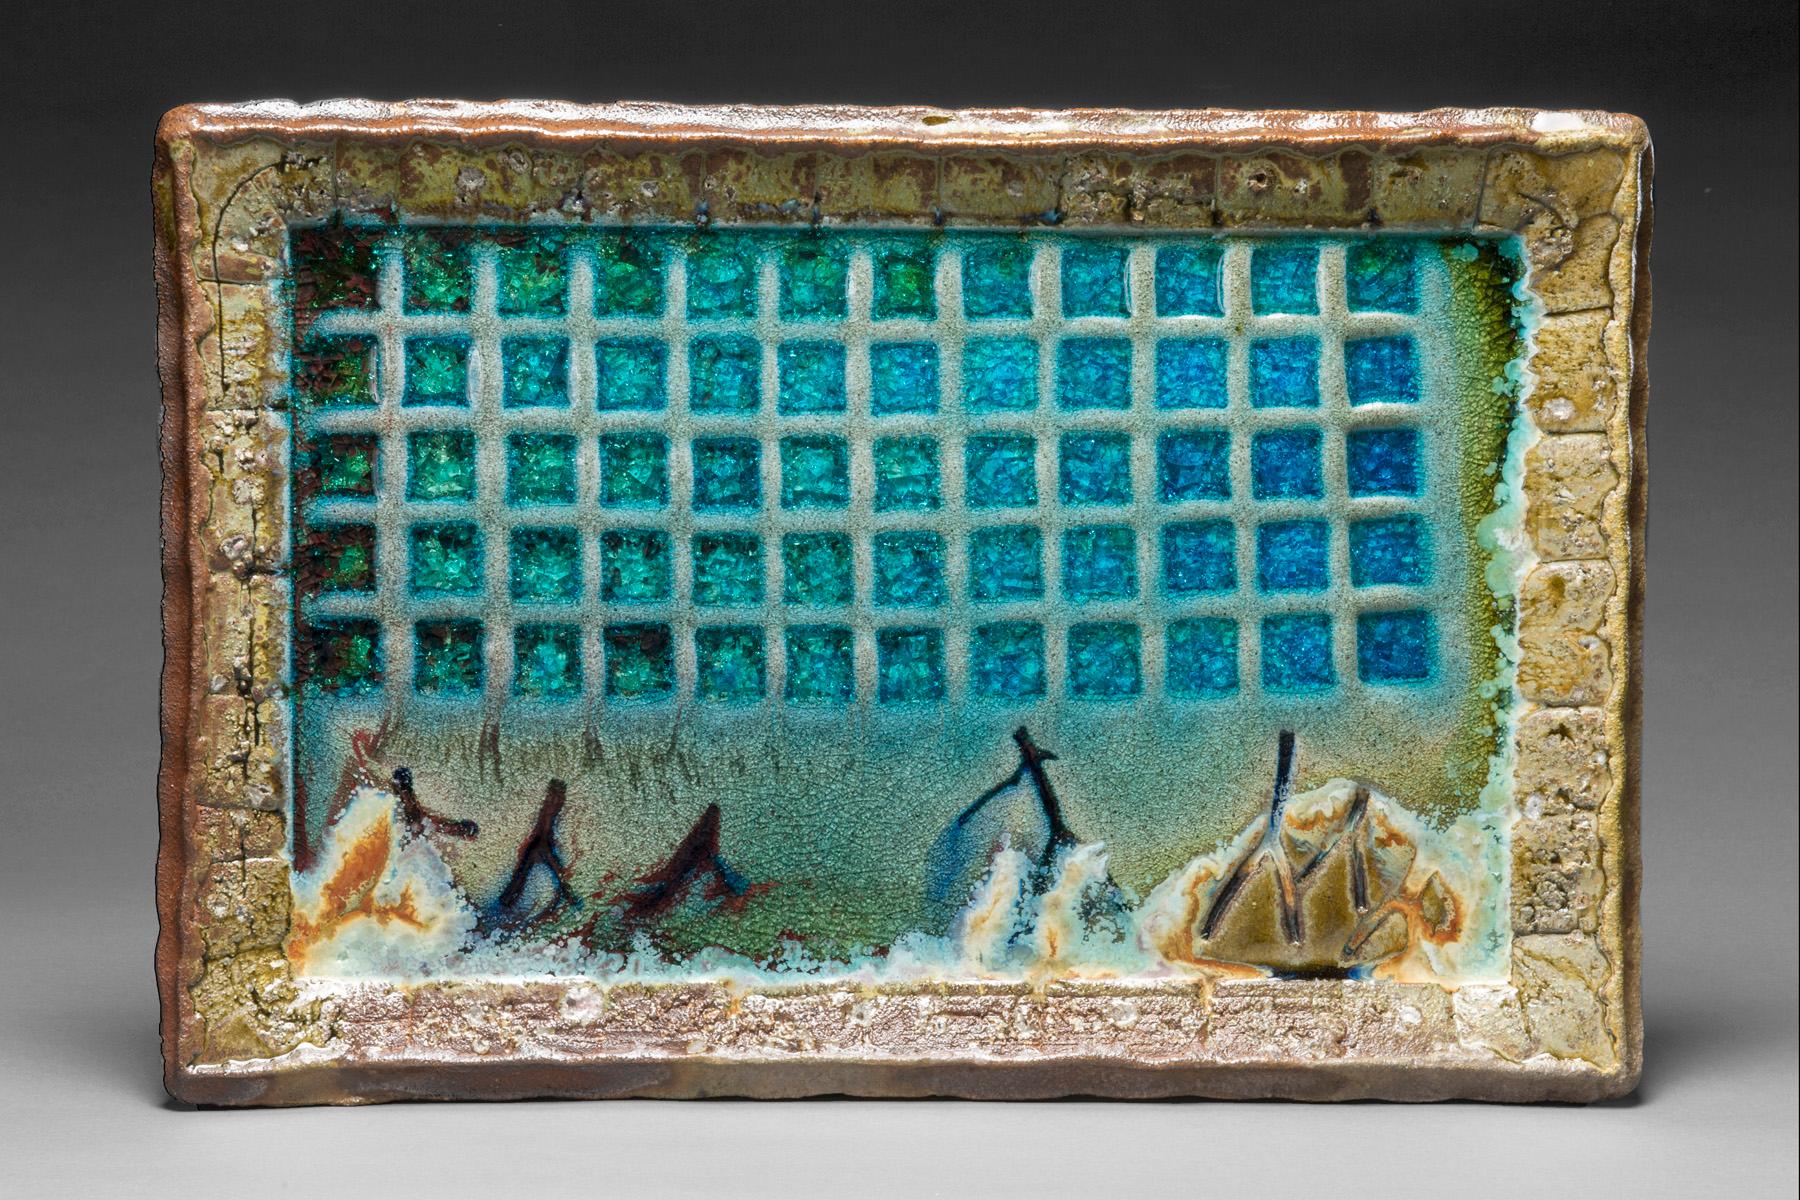 Tony Moore Abstract Sculpture - Wood Fired Ceramic Painting: 'Fire Painting 2.9.18'